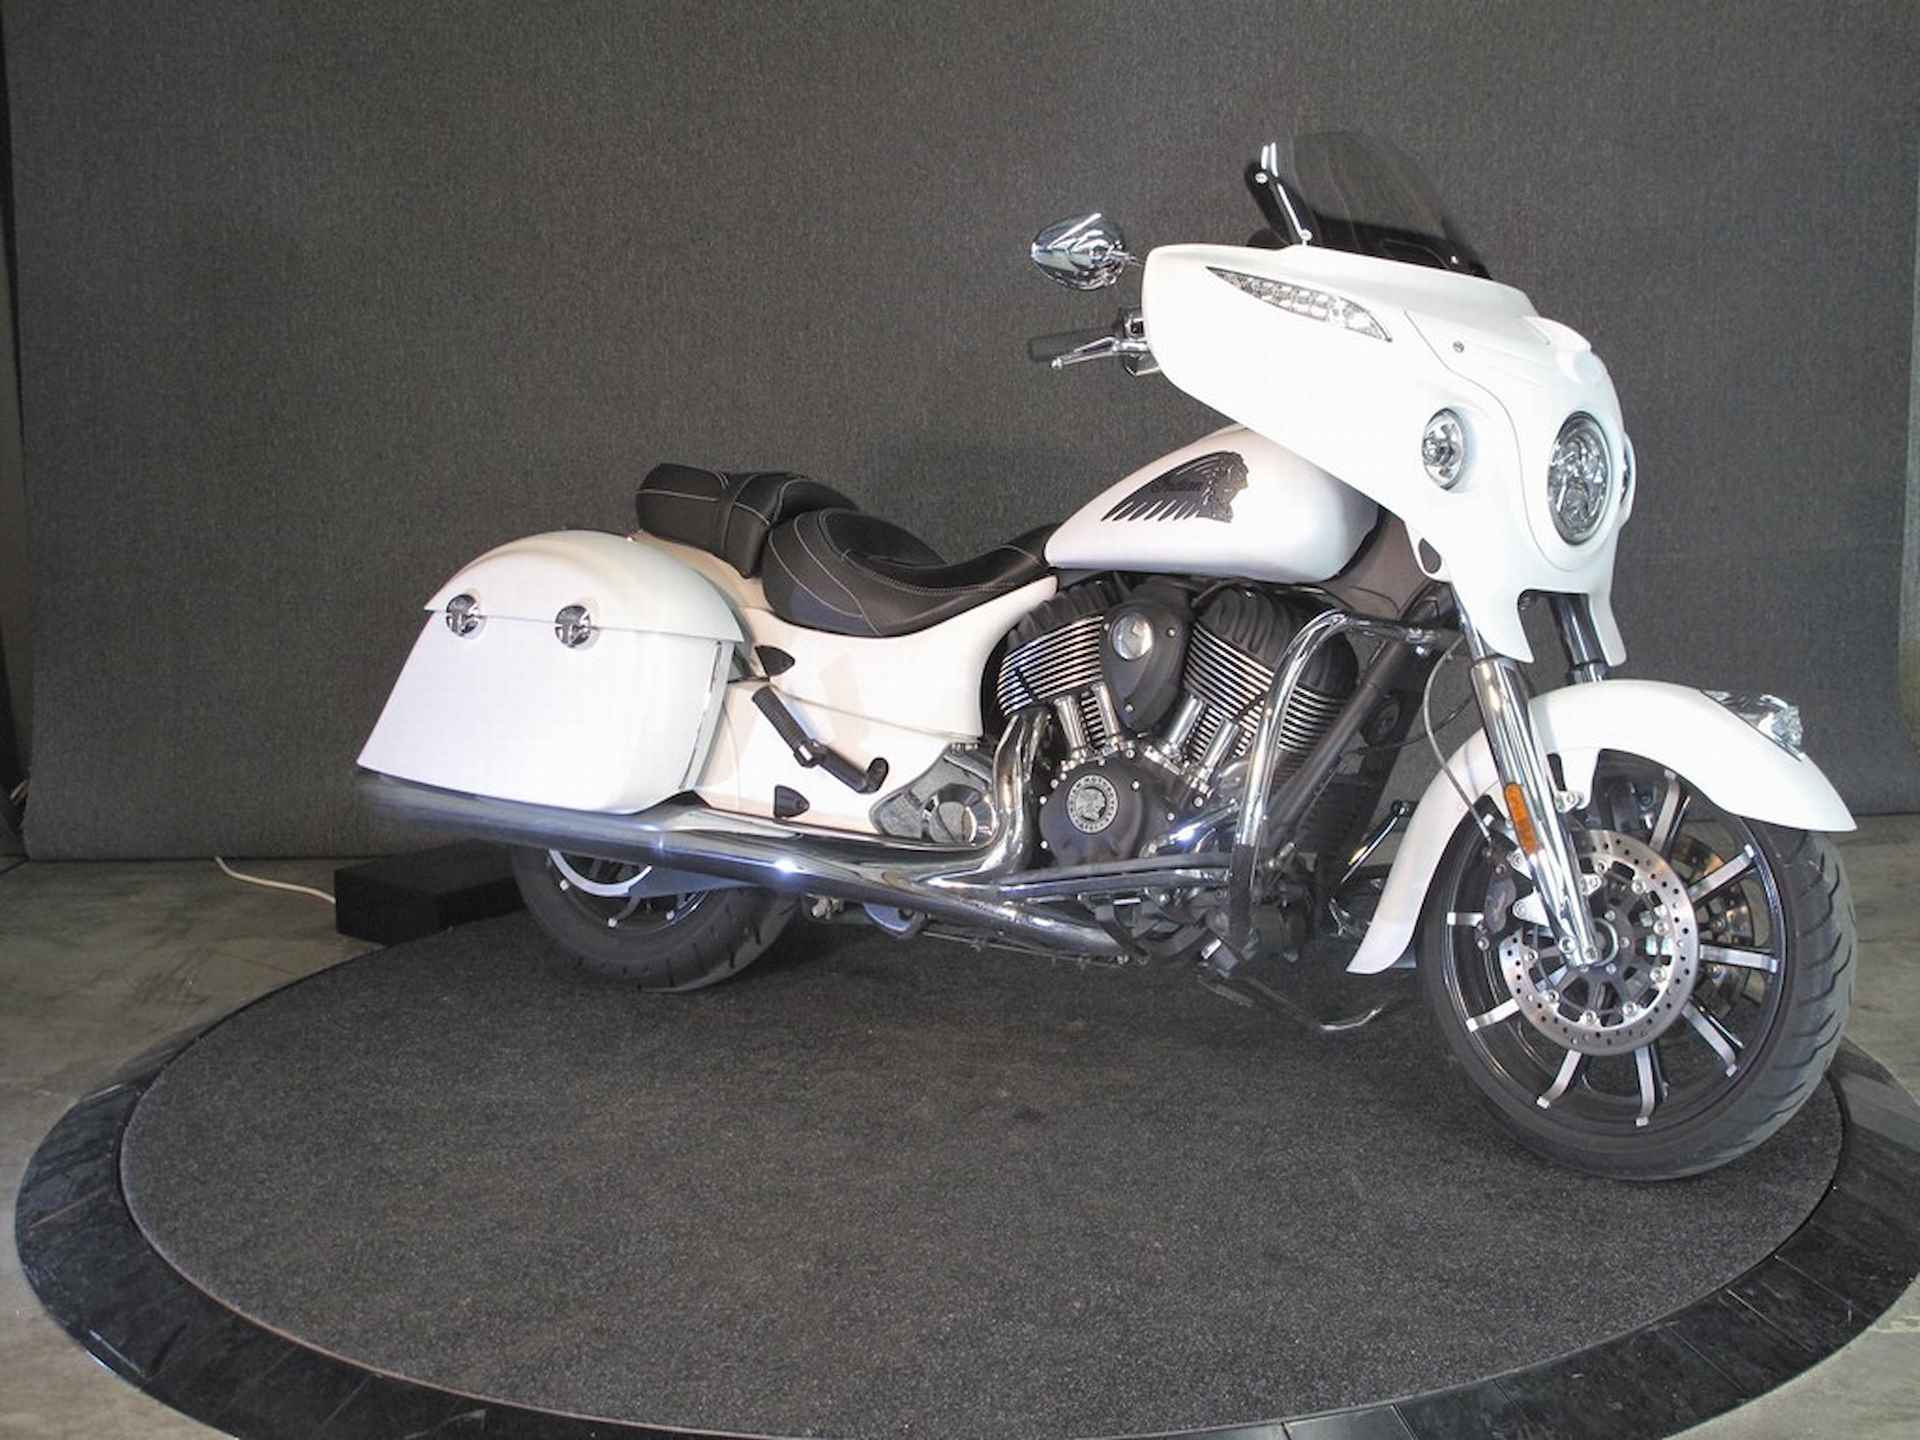 Indian Chieftain Dark Horse Official Indian Motorcycle Dealer - 6/17